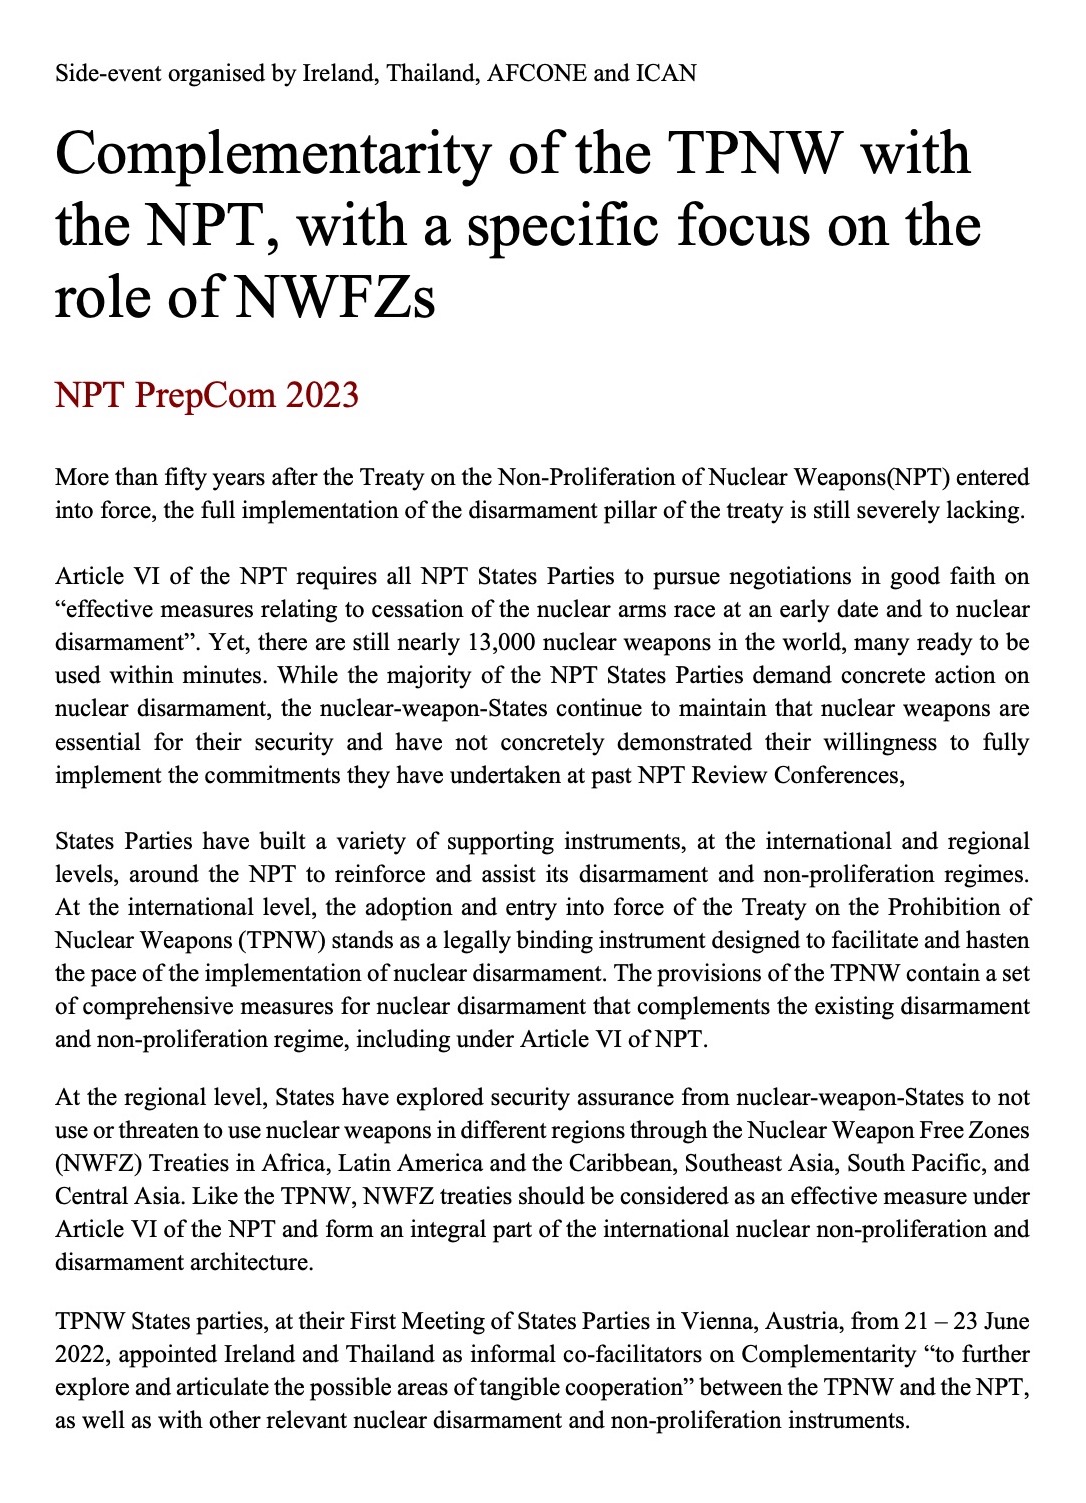 1Concept Note NPT PrepCom Side event on NPT TPNW NWFZ Complementarity 26 July 2023 with Moderator